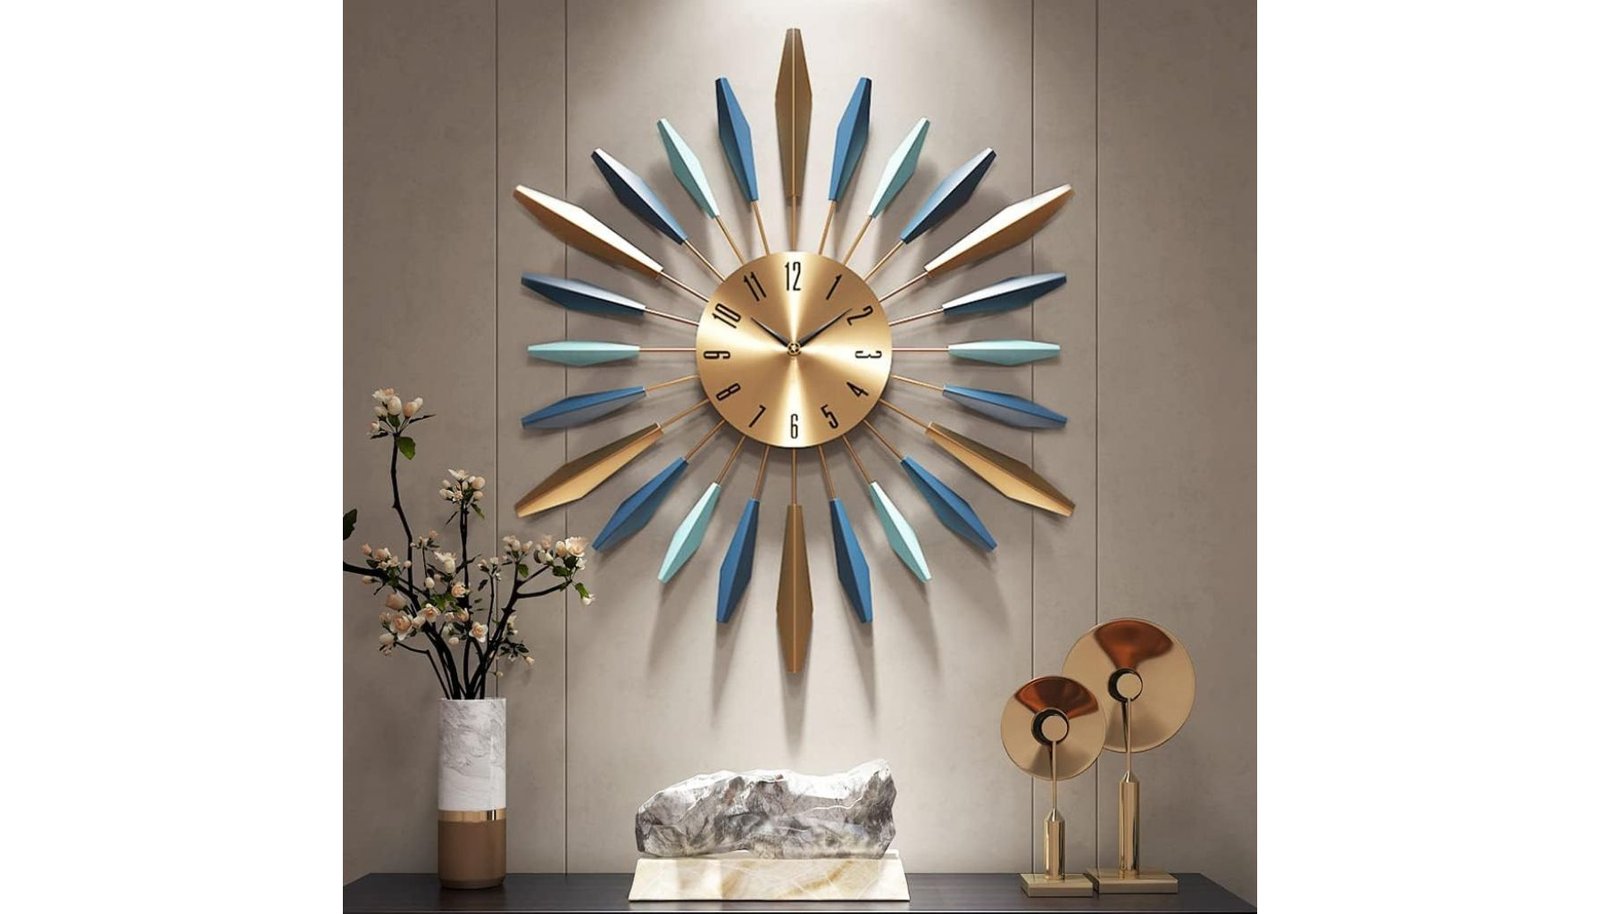 YISITEONE 22-inch Metal Decorative Mid-Century Office Room Wall Clock Review